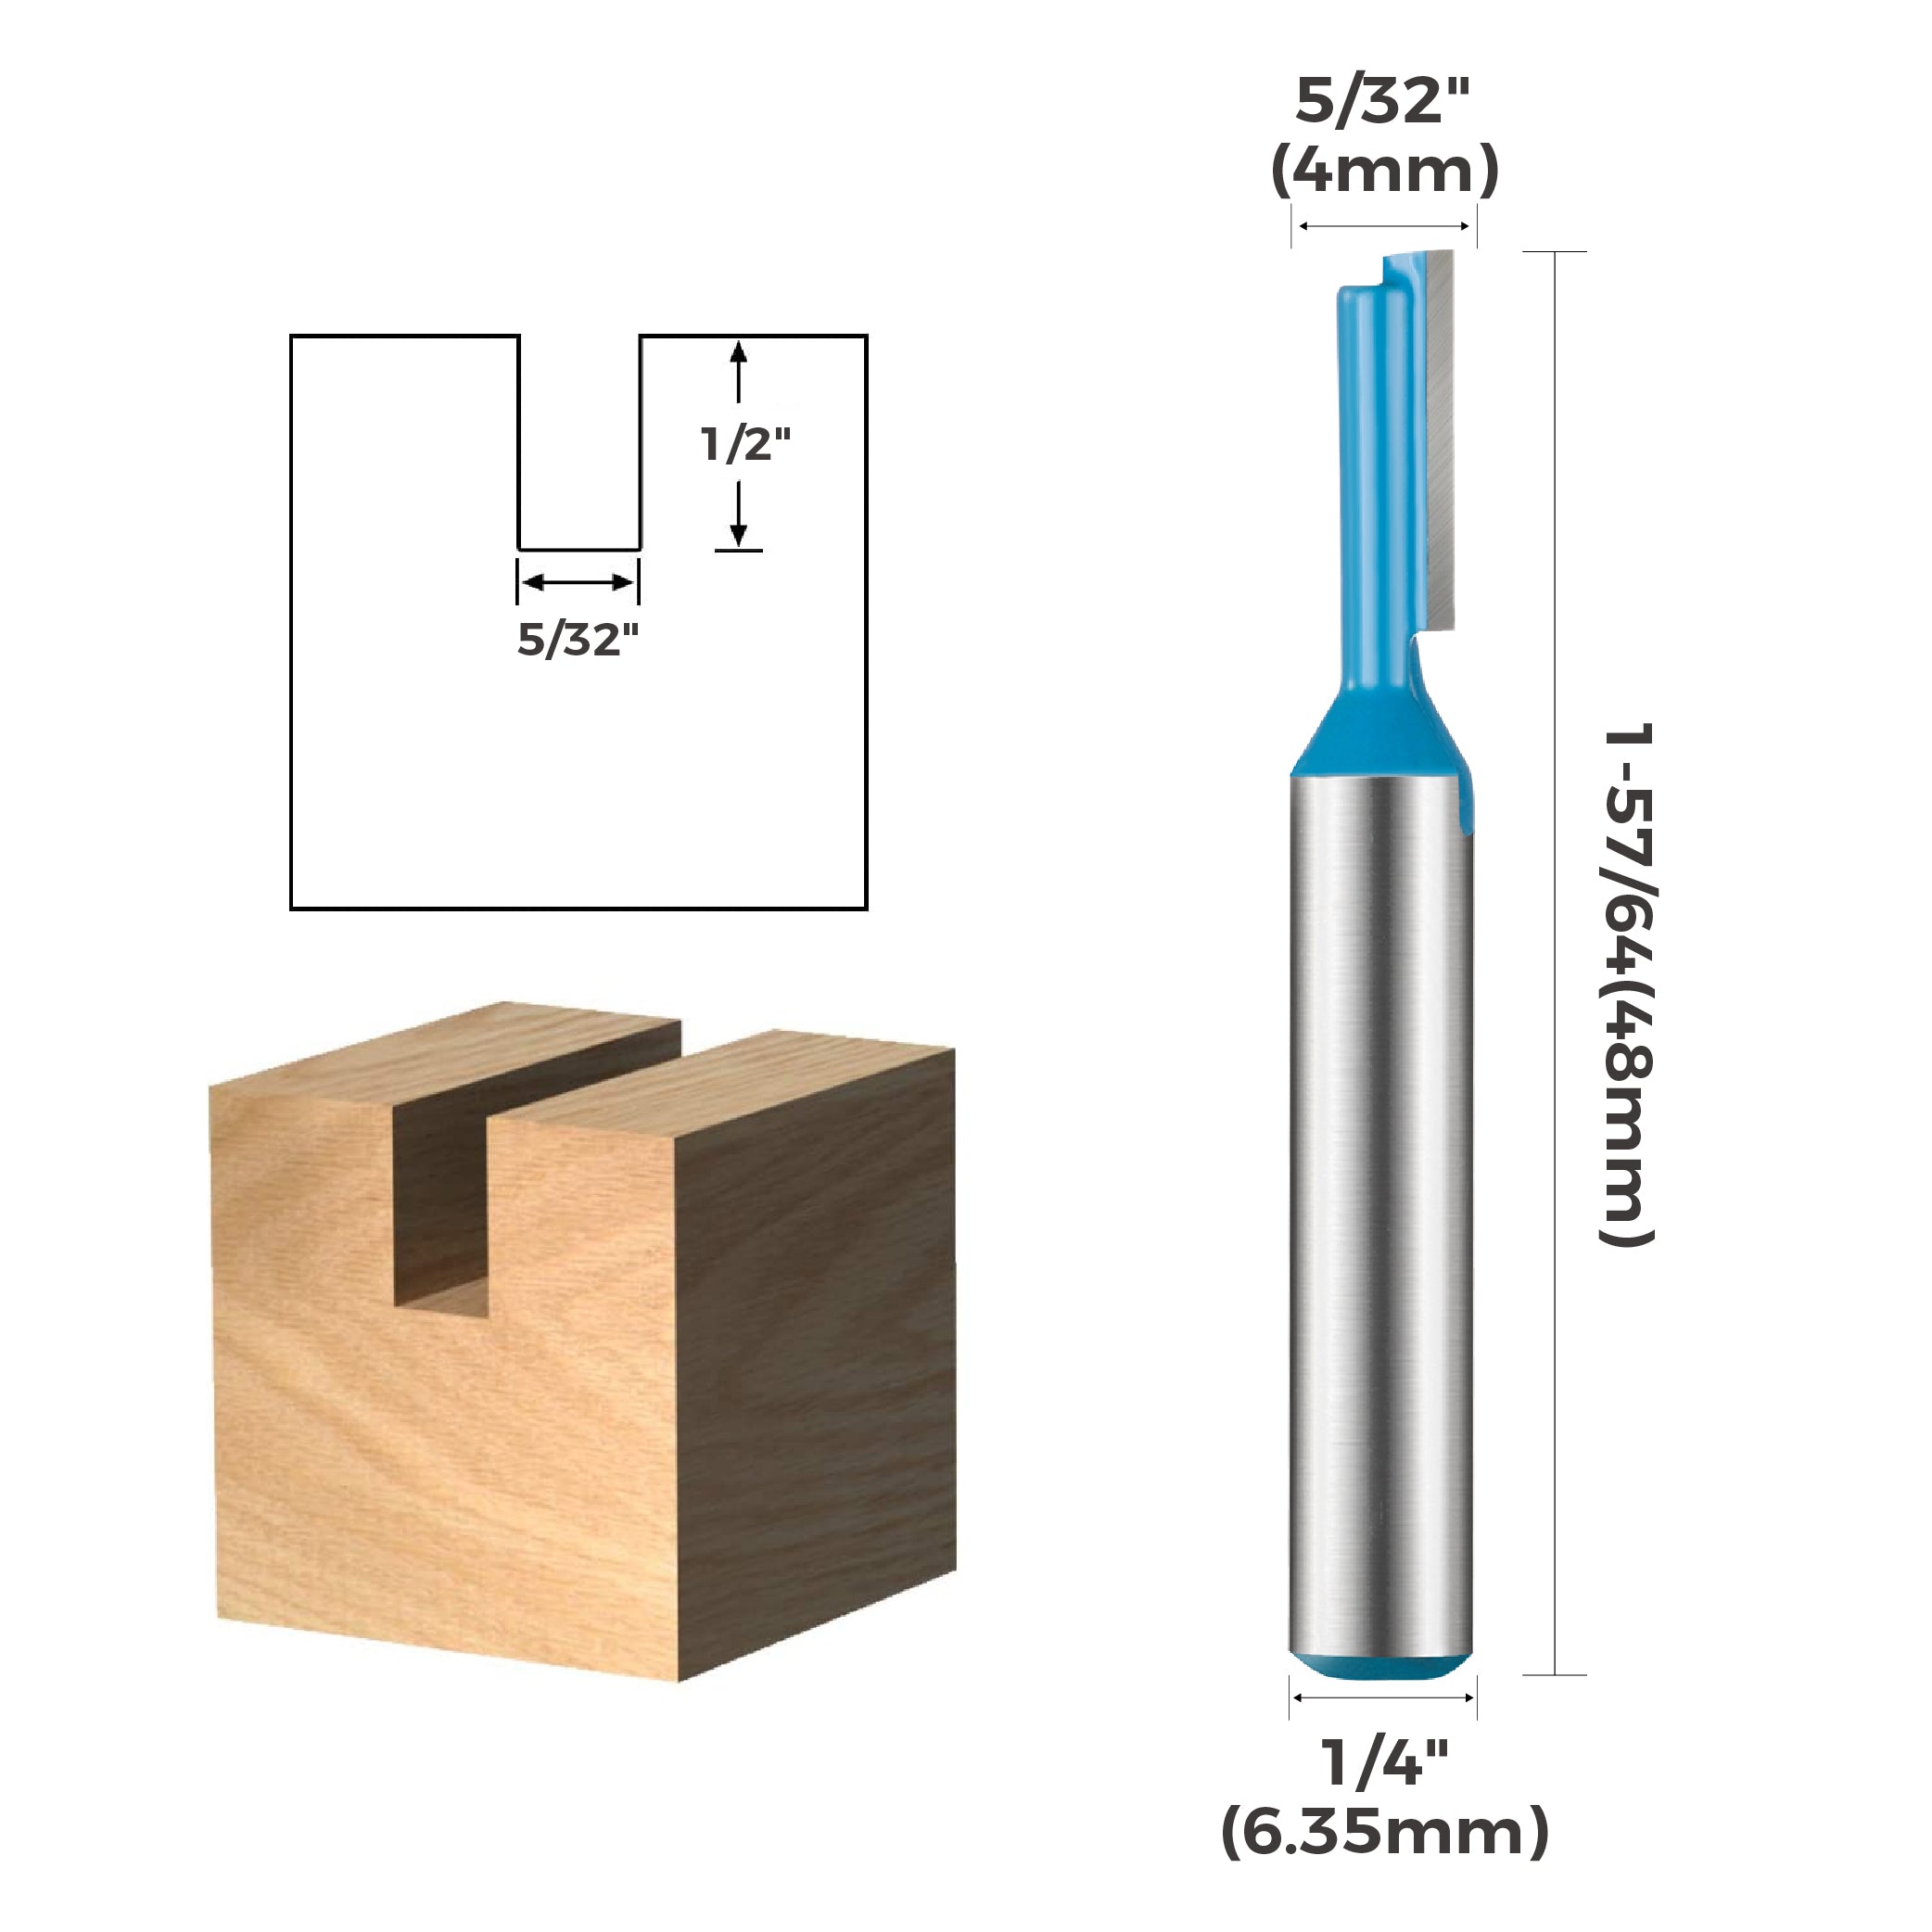 toolant Straight Router Bits , 1/4-Inch Shank 5/32-Inch Dia, Carbide-Tipped Milling Cutter for Woodworking